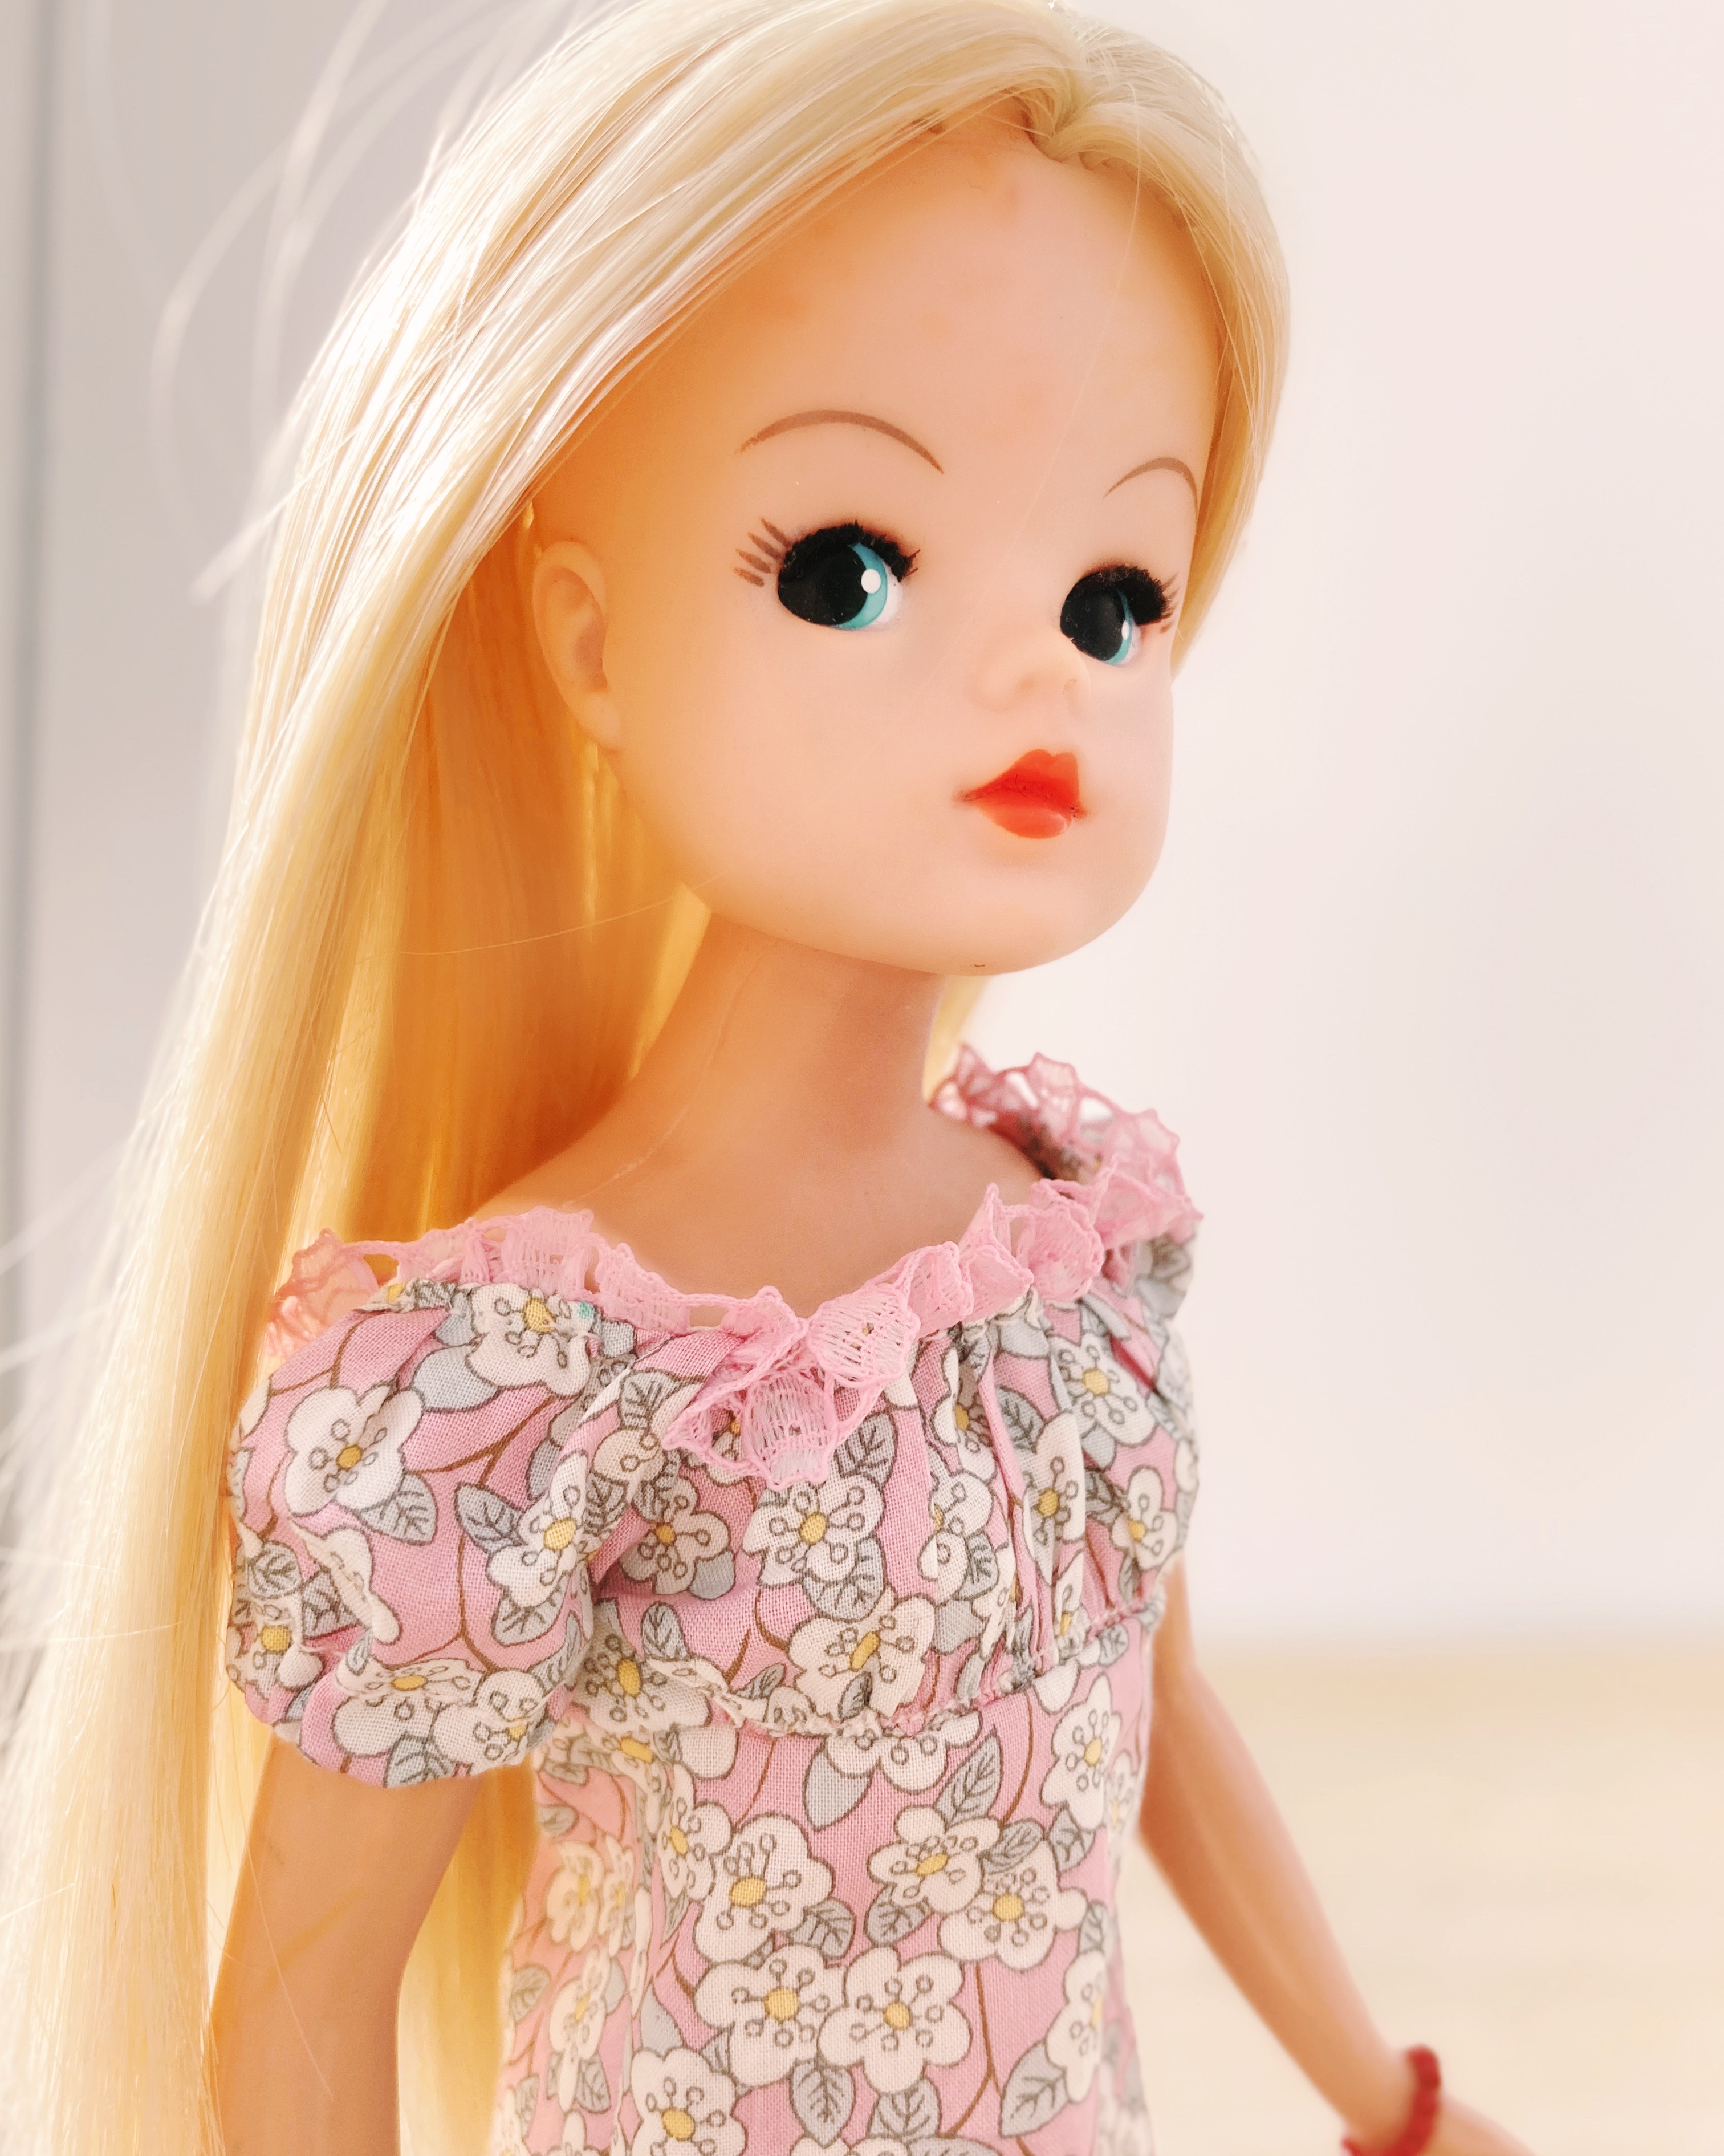 Clothes and accessories made for sindy  dolls  